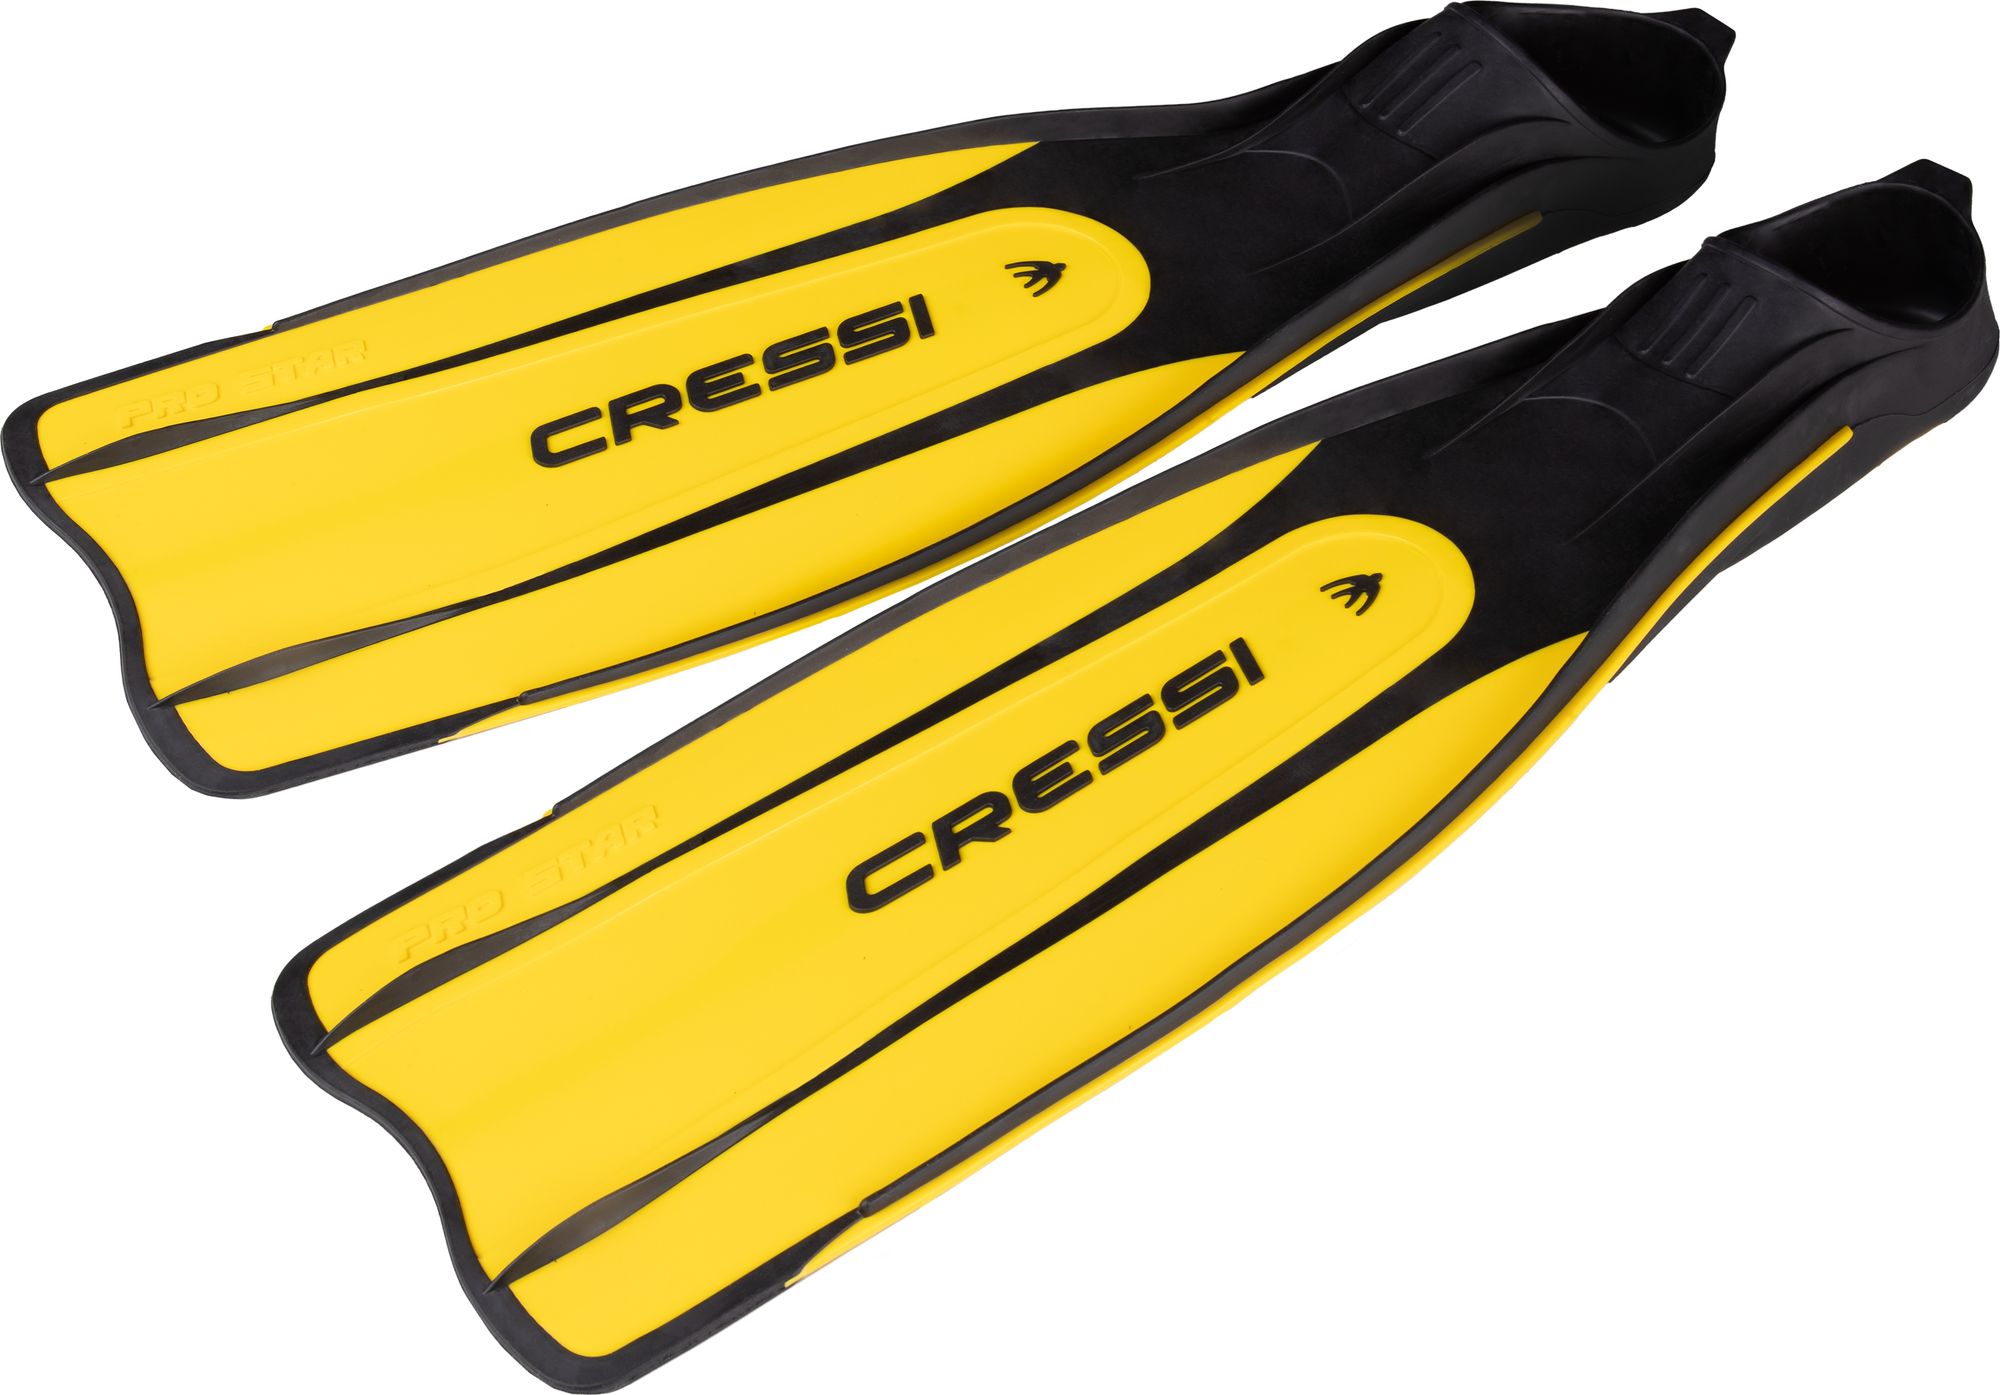 Cressi Pro Star Fins pinne spiaggia immersion subacque pinn scarpett chius pal lung scuba diving snorkeling & beach long blade full foot fins adult